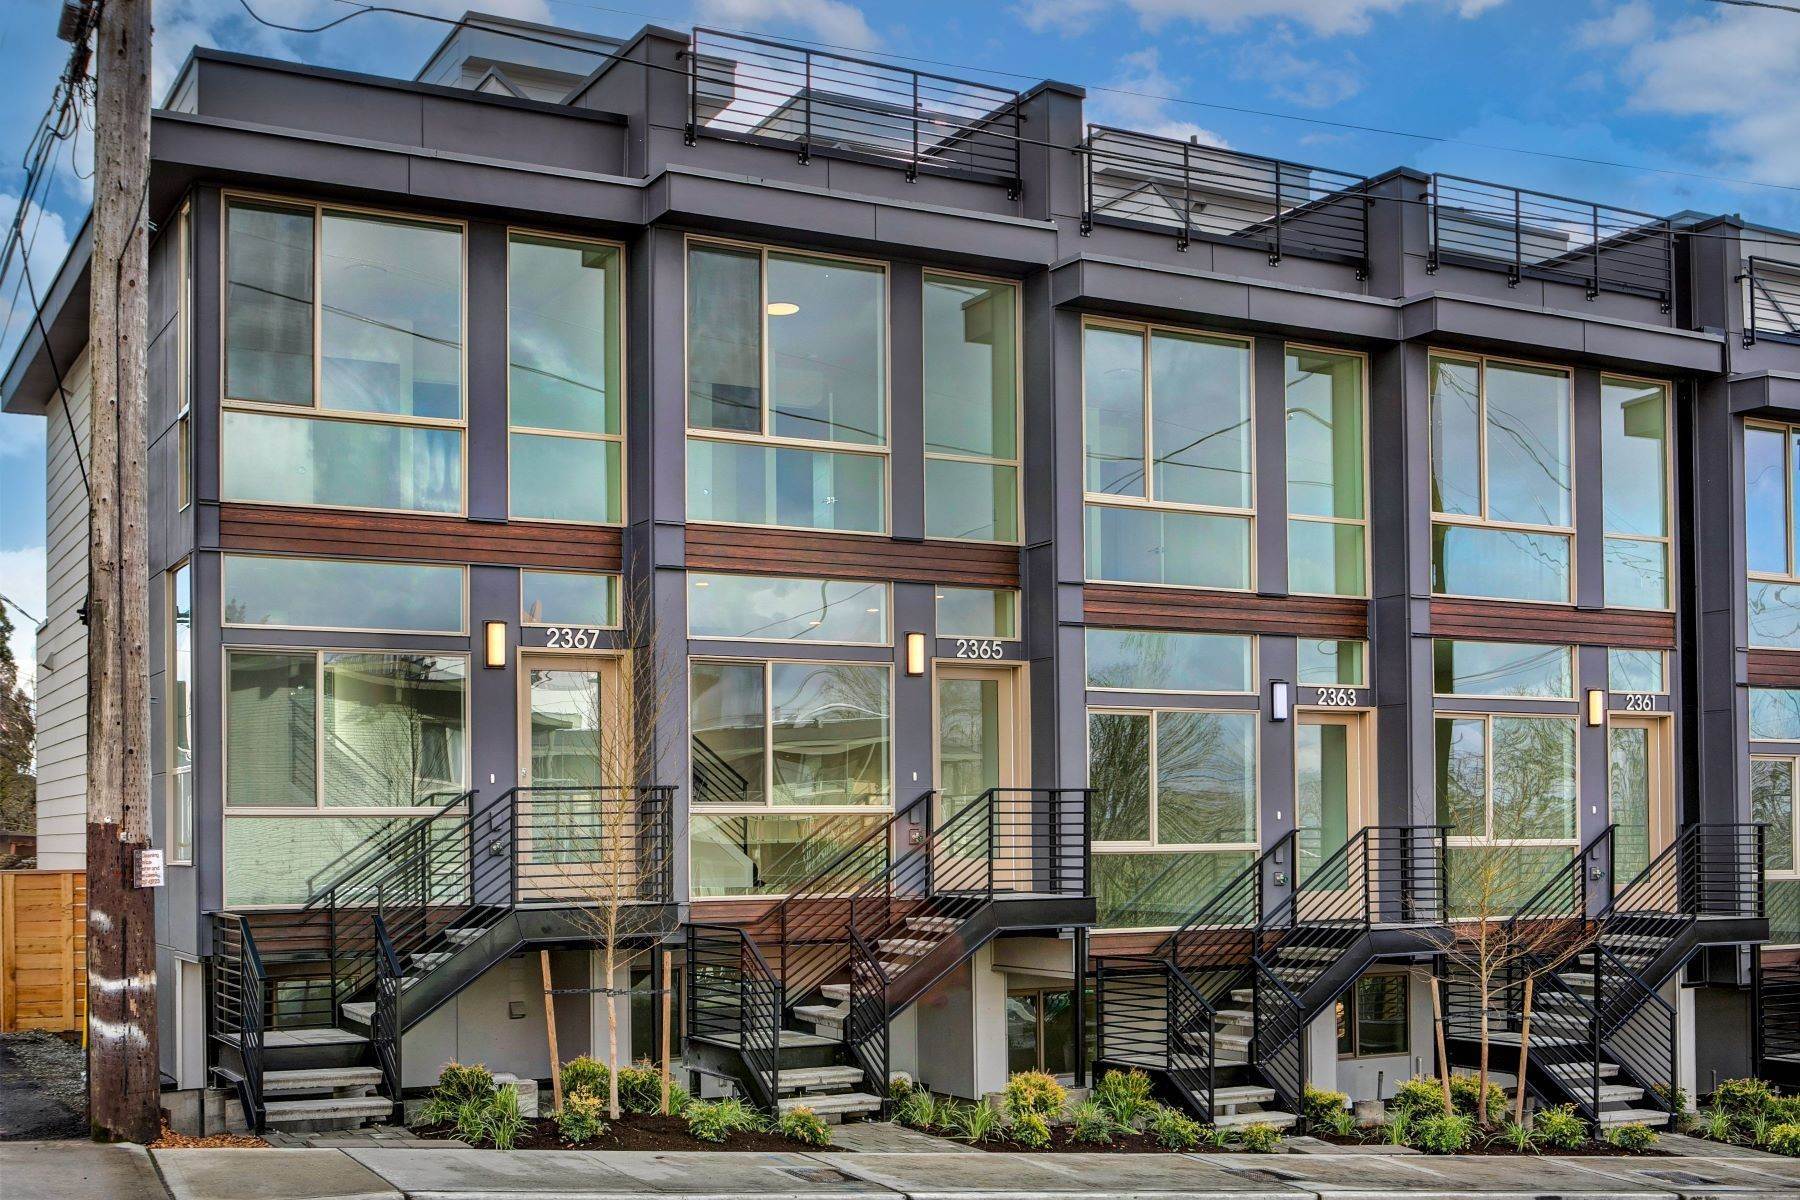 Townhouse for Sale at 2361 Beacon Ave S, Seattle, WA 98144 2361 Beacon Ave S Seattle, Washington 98144 United States